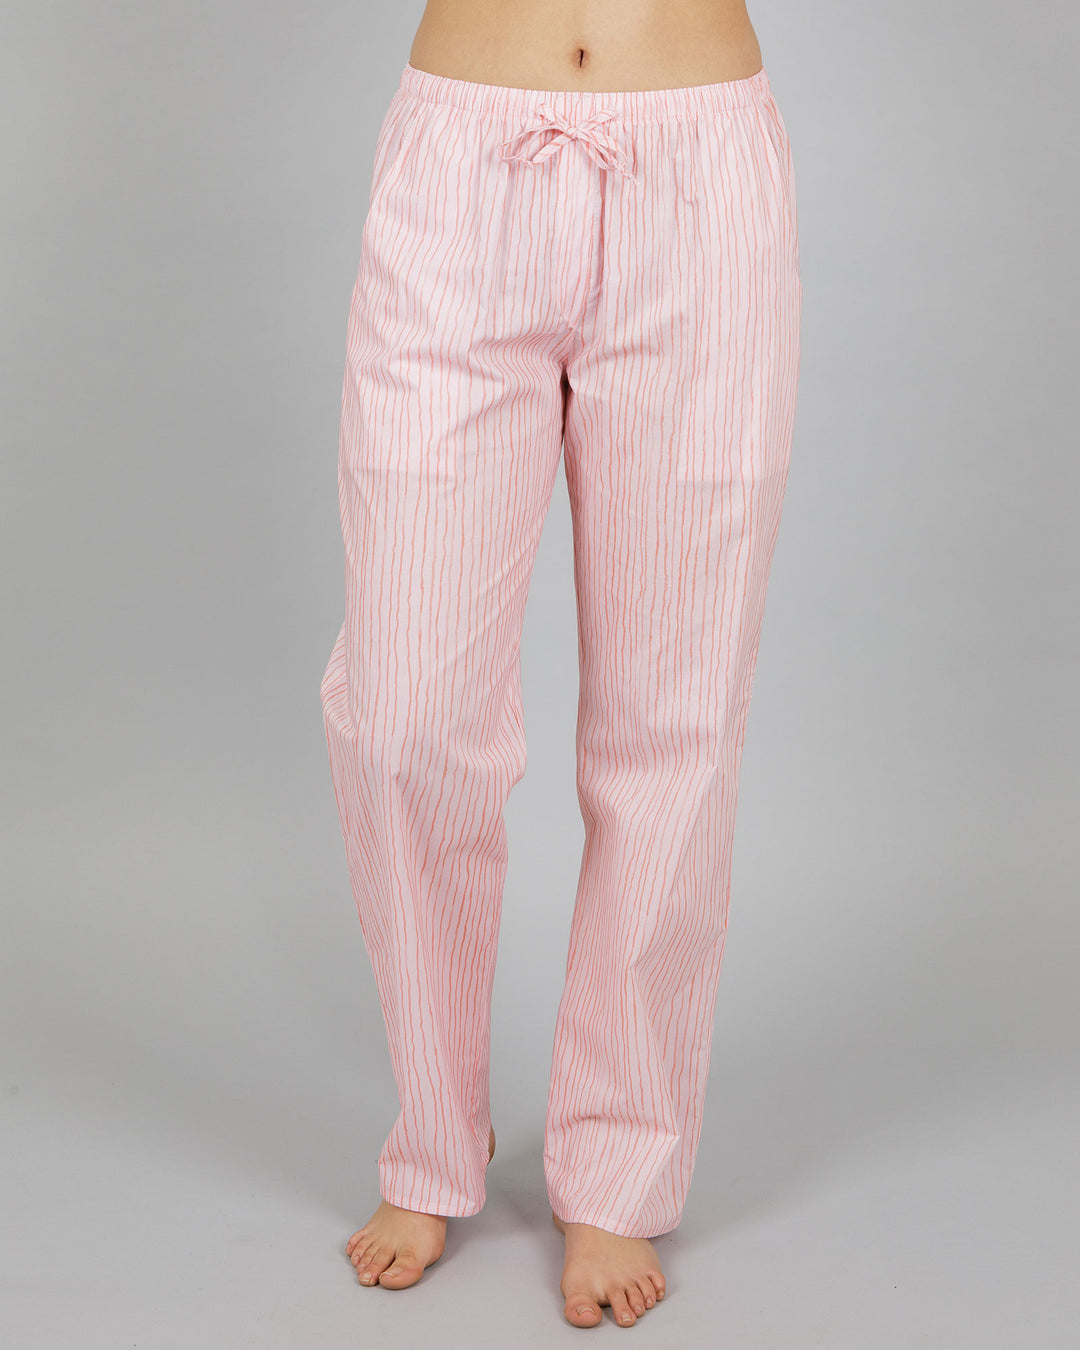 Womens Lounge Pants Shaky Pink Front - Woodstock Laundry